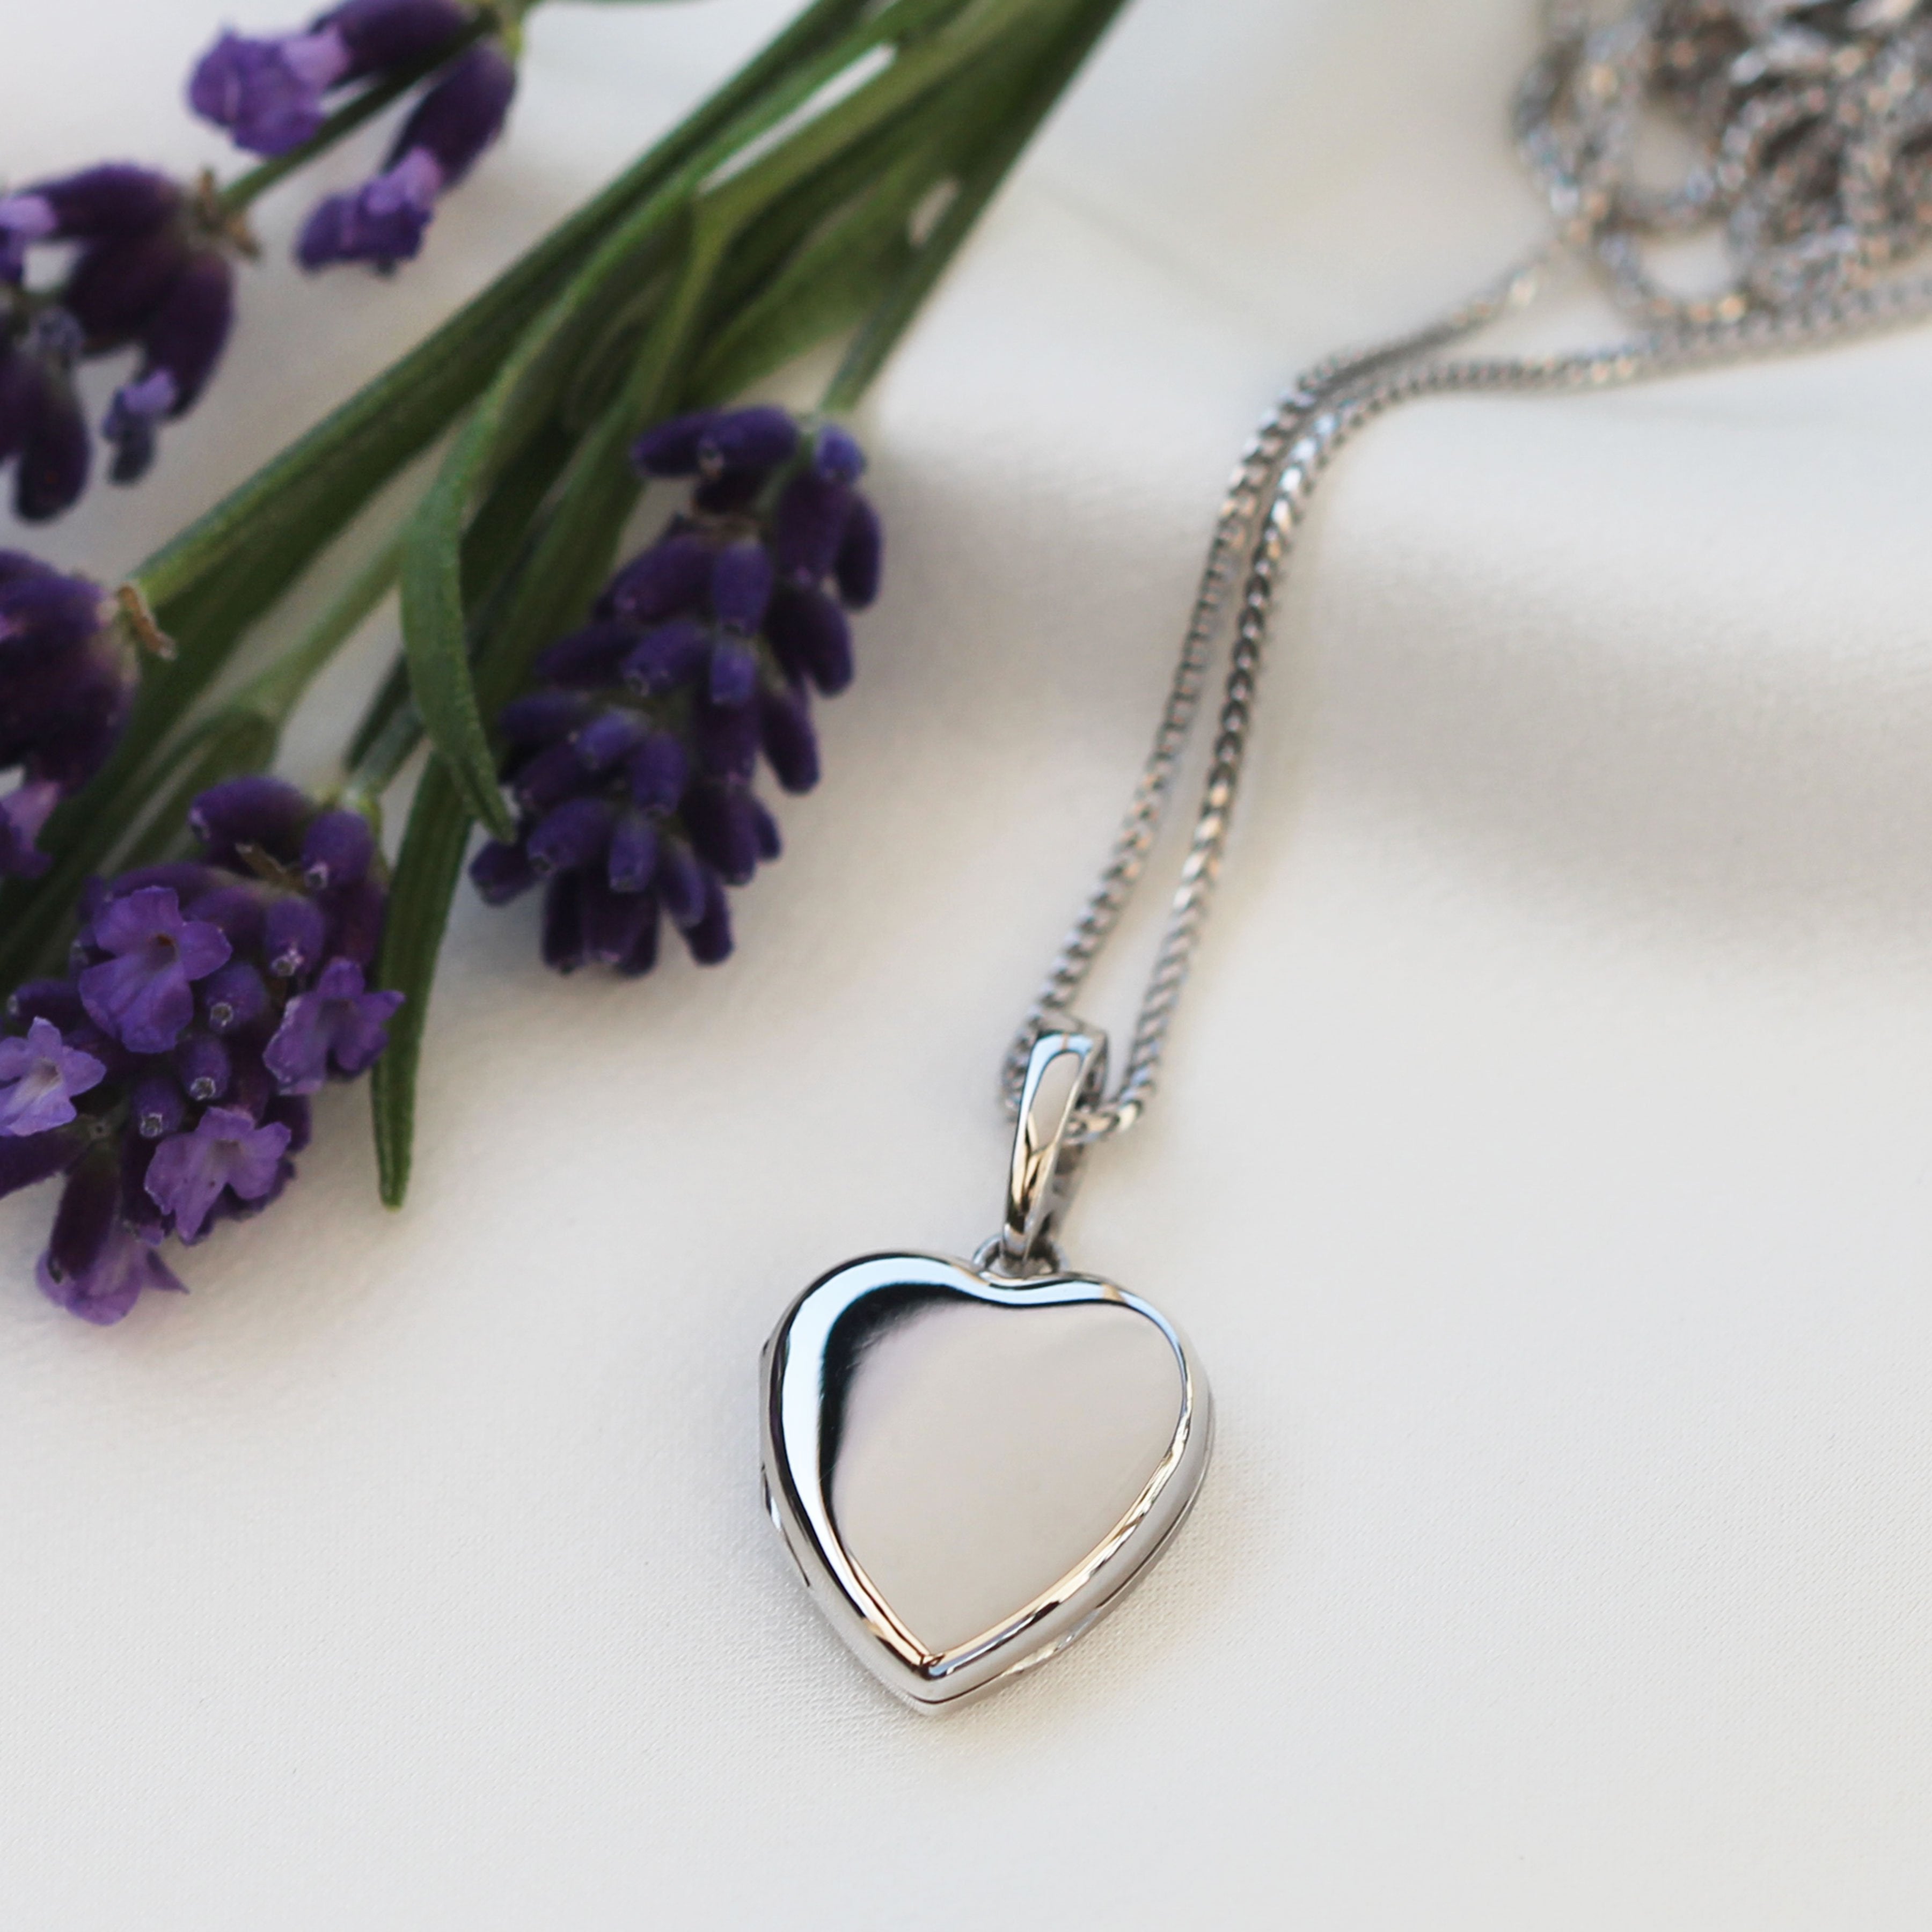 An 18 ct white gold heart locket lying alongside a spray of purple flowers, on a bed of white silk.